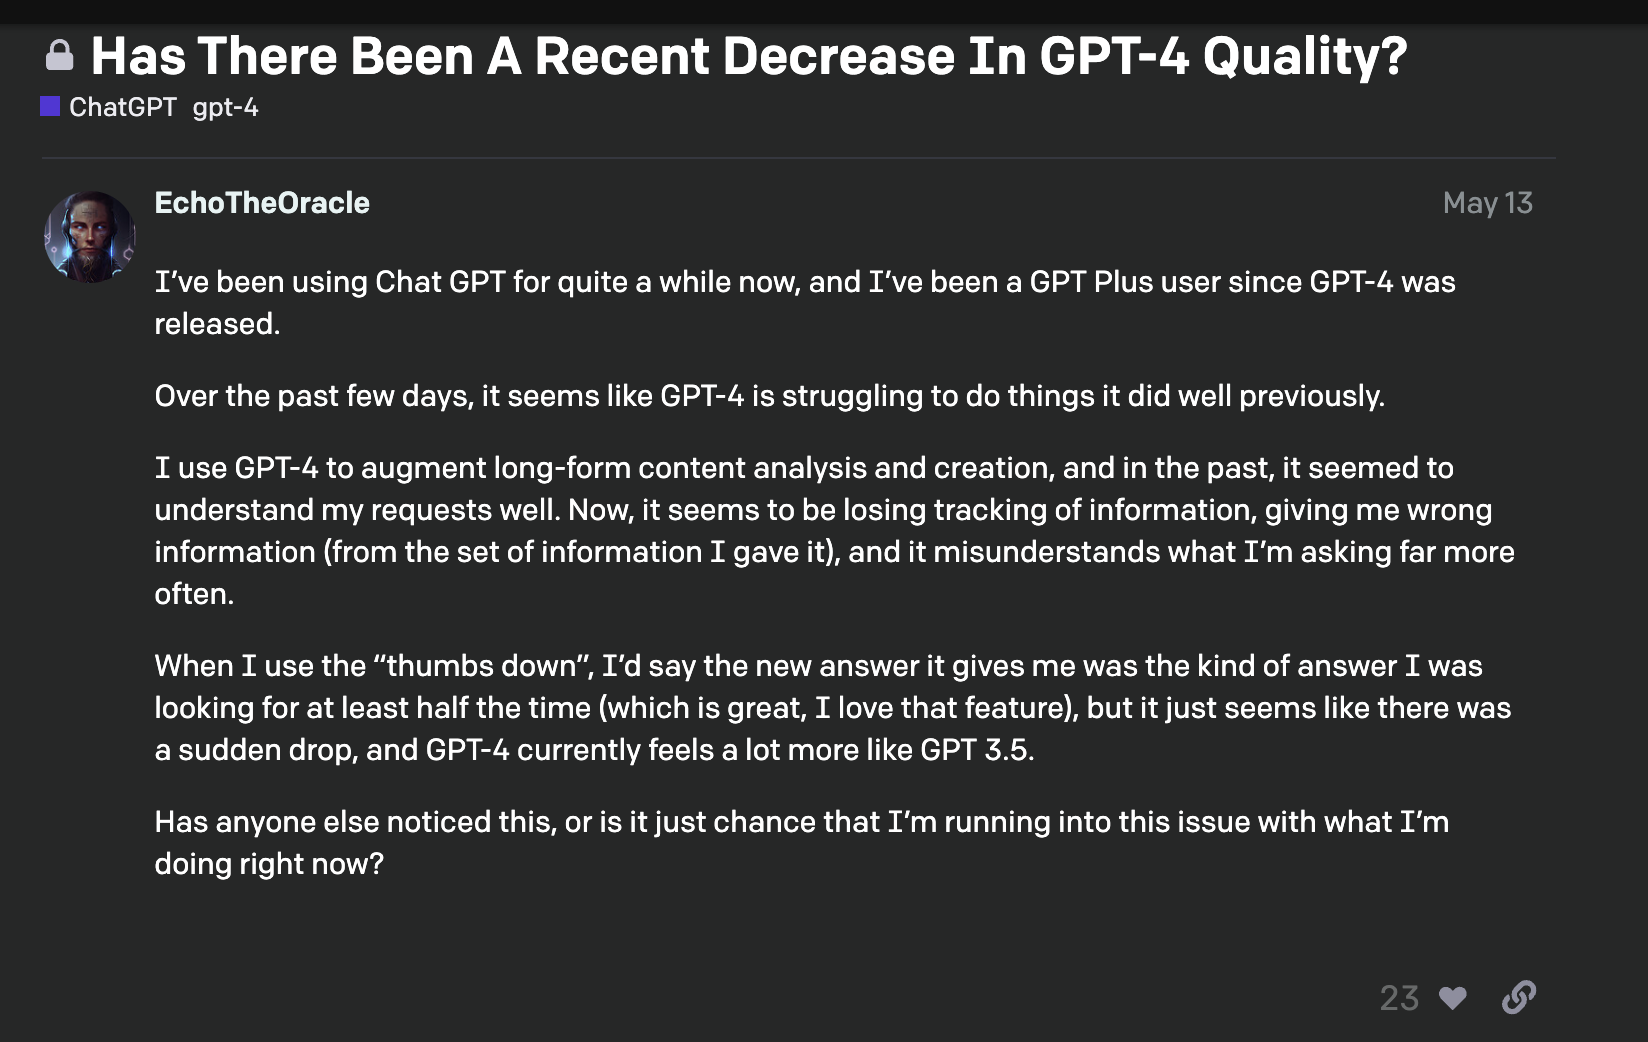 ChatGPT decreased in quality